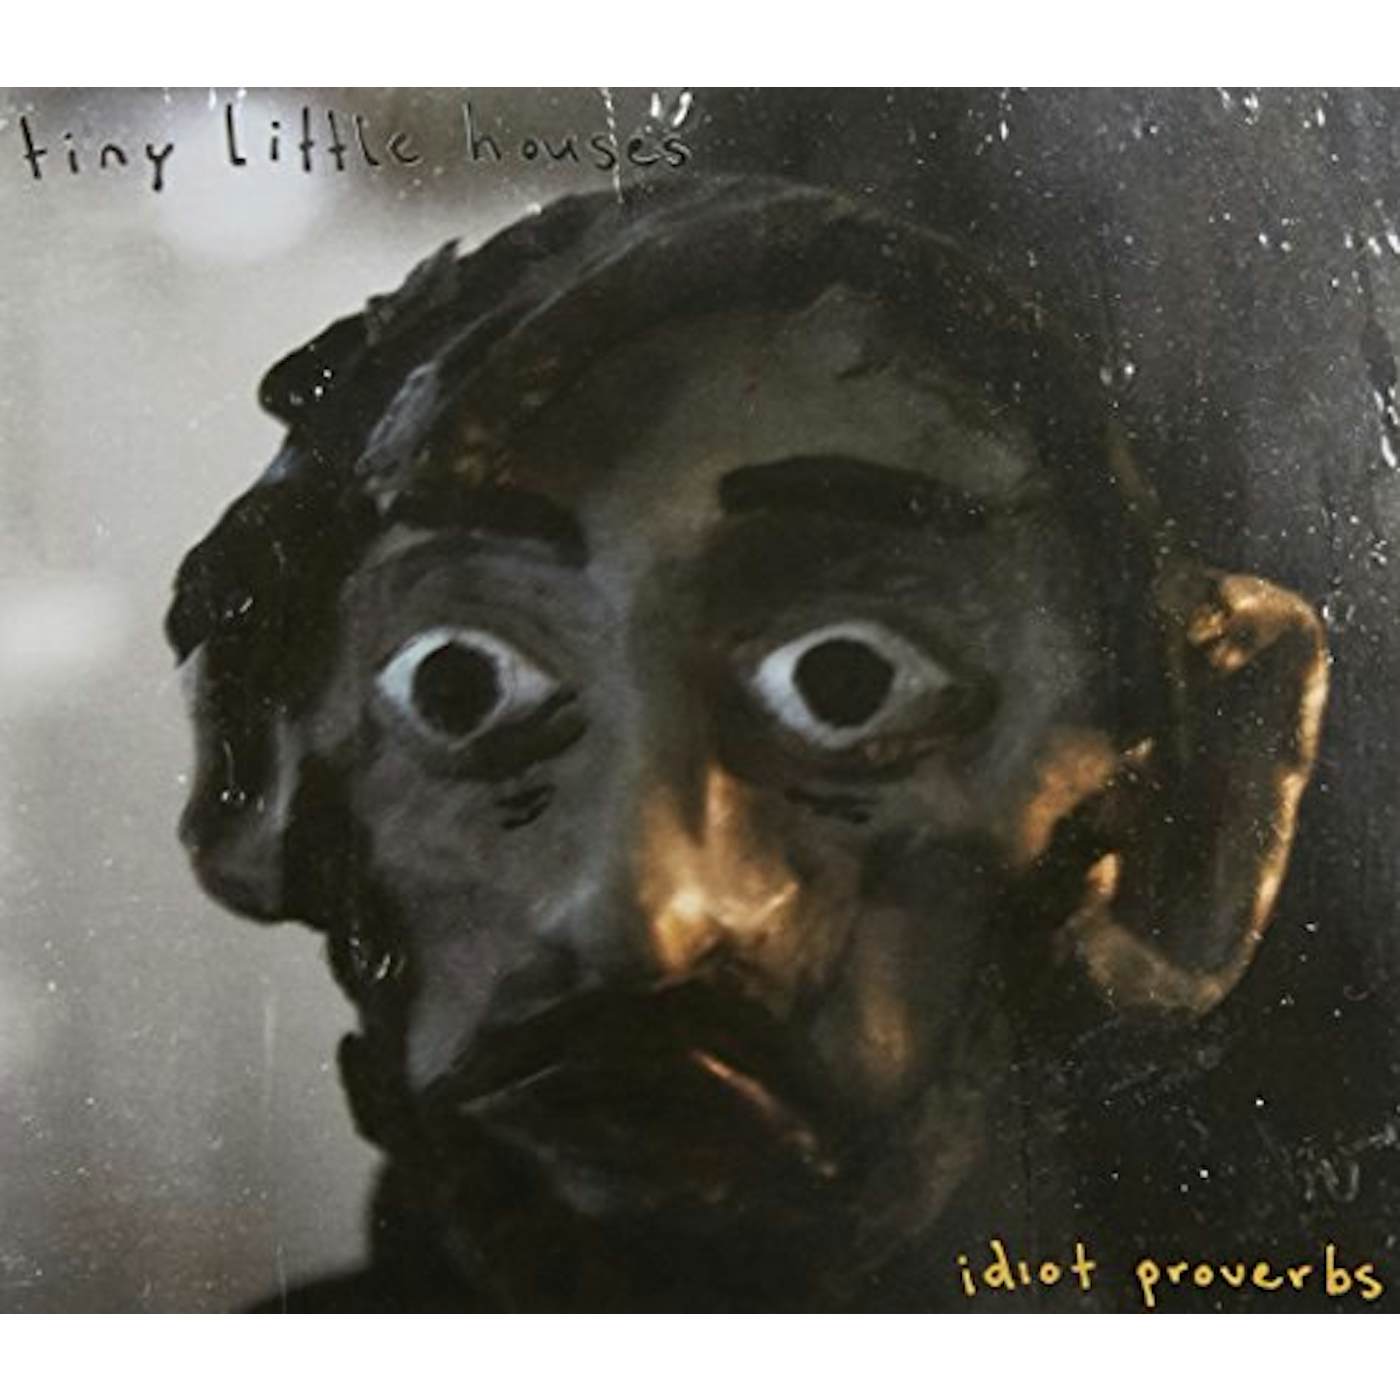 Tiny Little Houses IDIOT PROVERBS CD